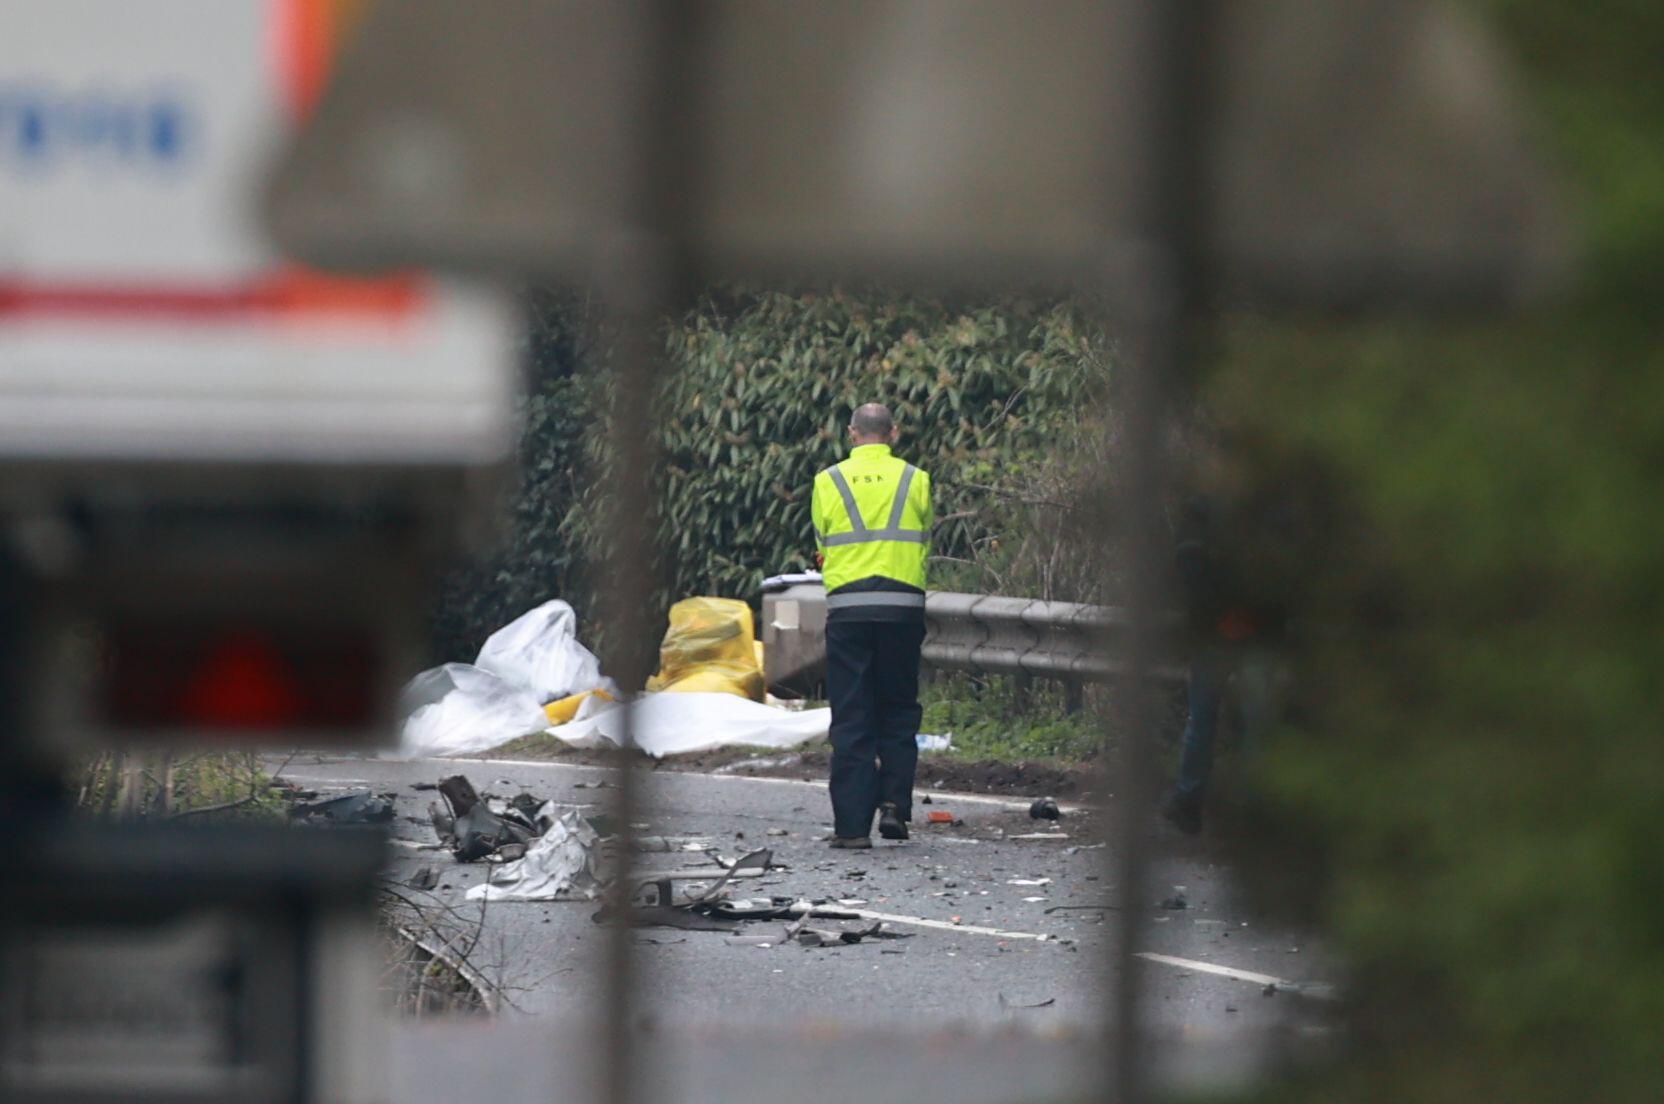 The scene after a serious crash on the A5 outside Aughnacloy in County Tyrone.